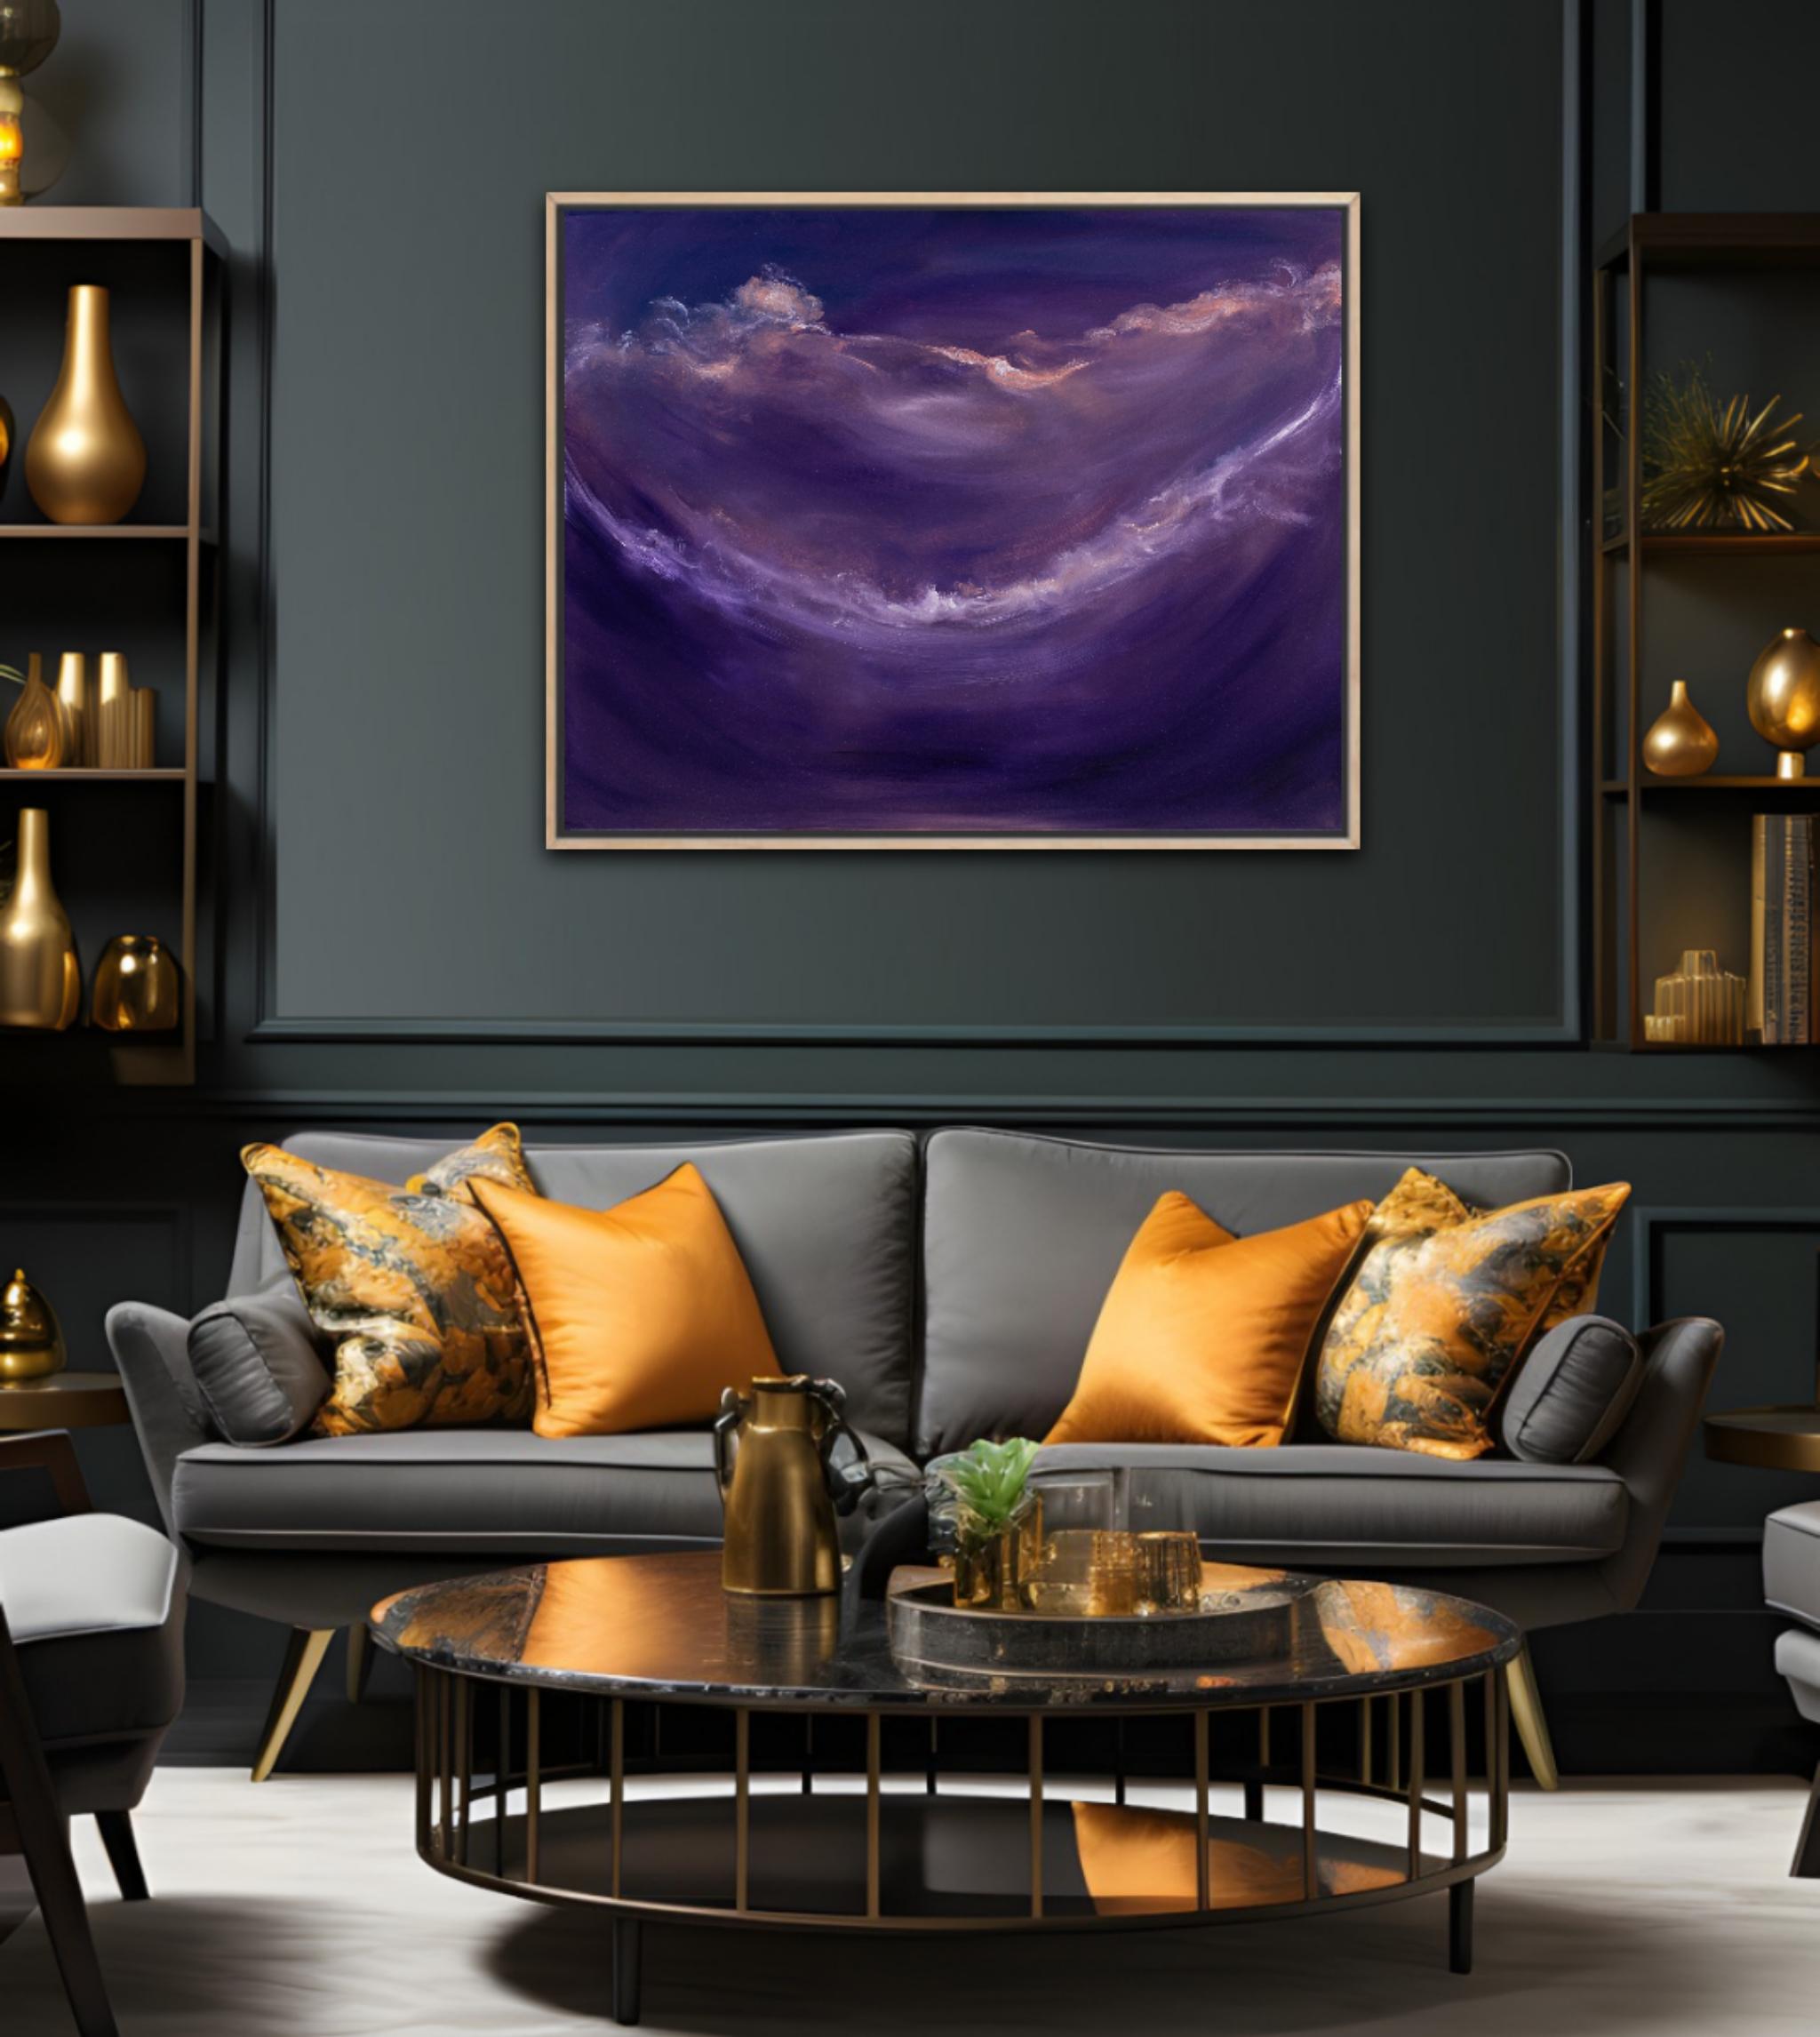 Deep space rhapsody - Abstract purple night sky painting - Painting by Jennifer L. Baker